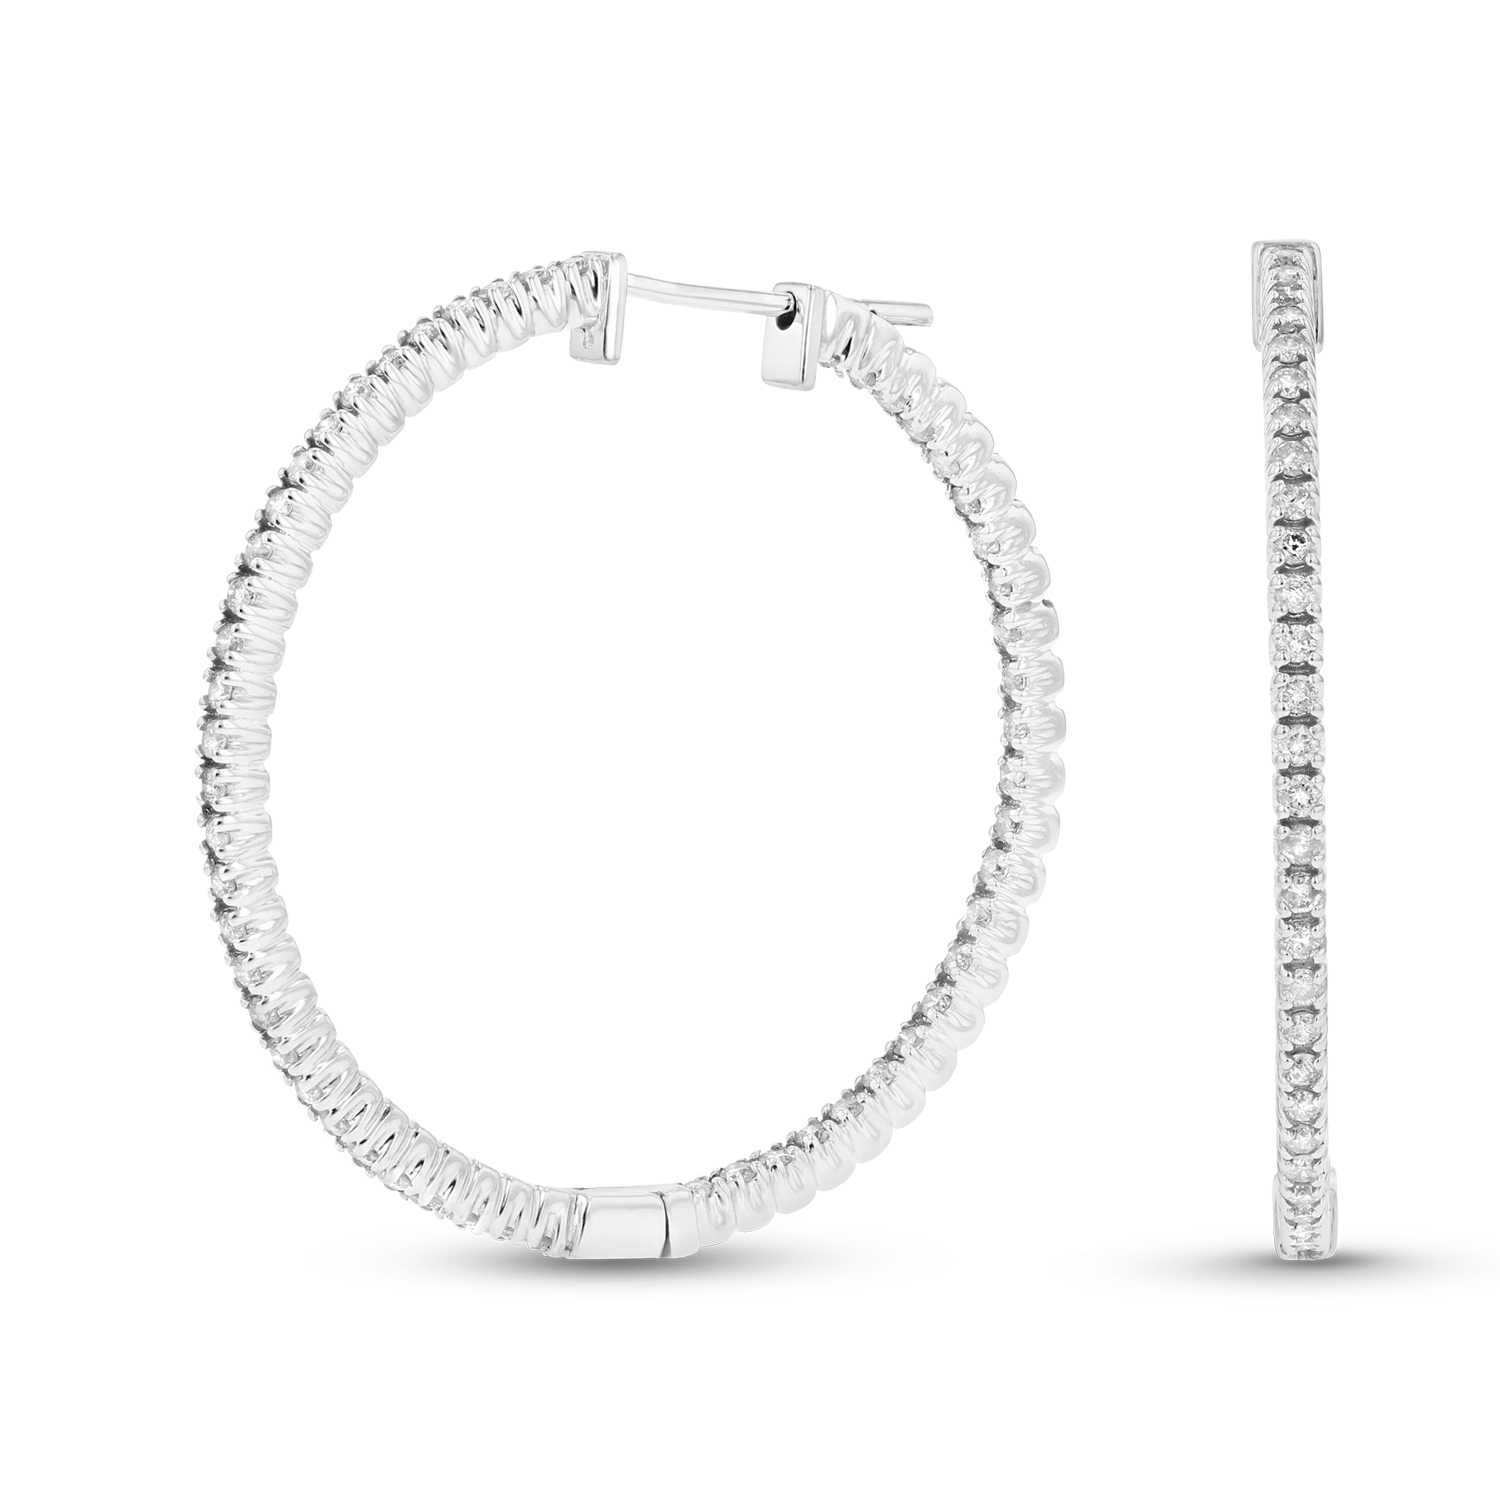 View 14k Gold Hoop Earrings with 1.10cttw of Diamonds. 1 1/4 Inches in Diameter